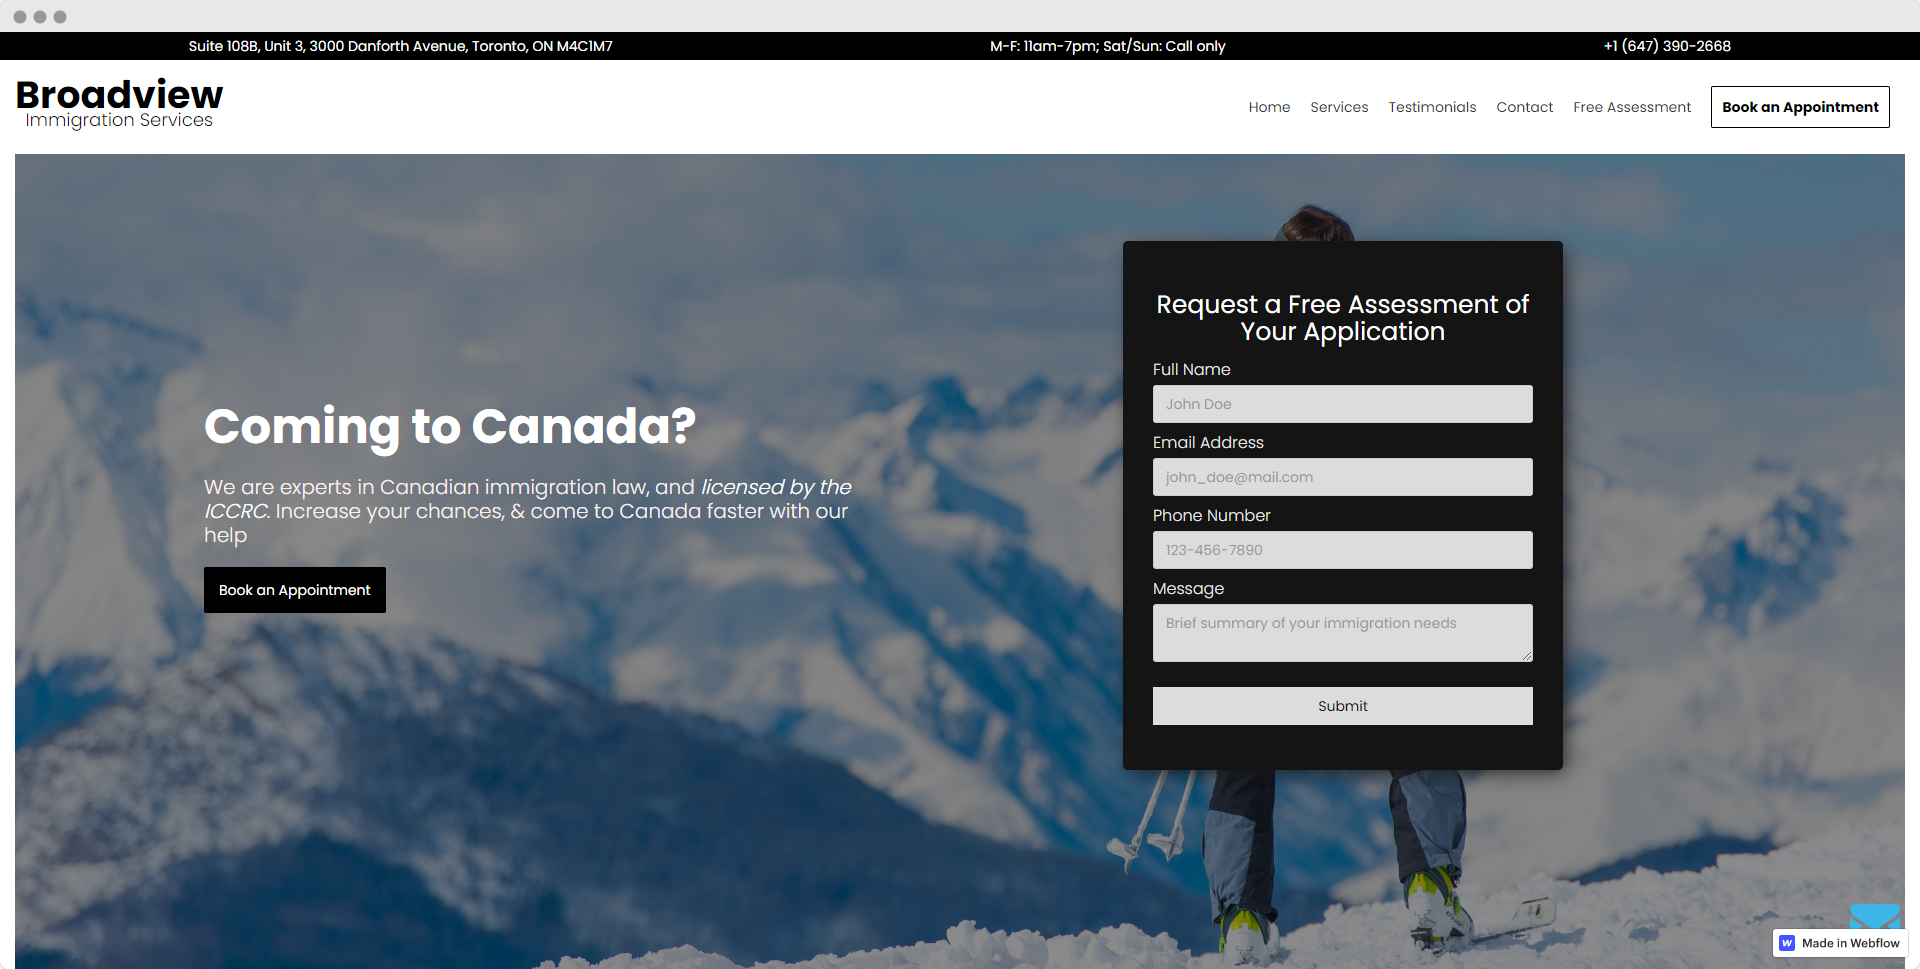 Broadview Immigration Services Website